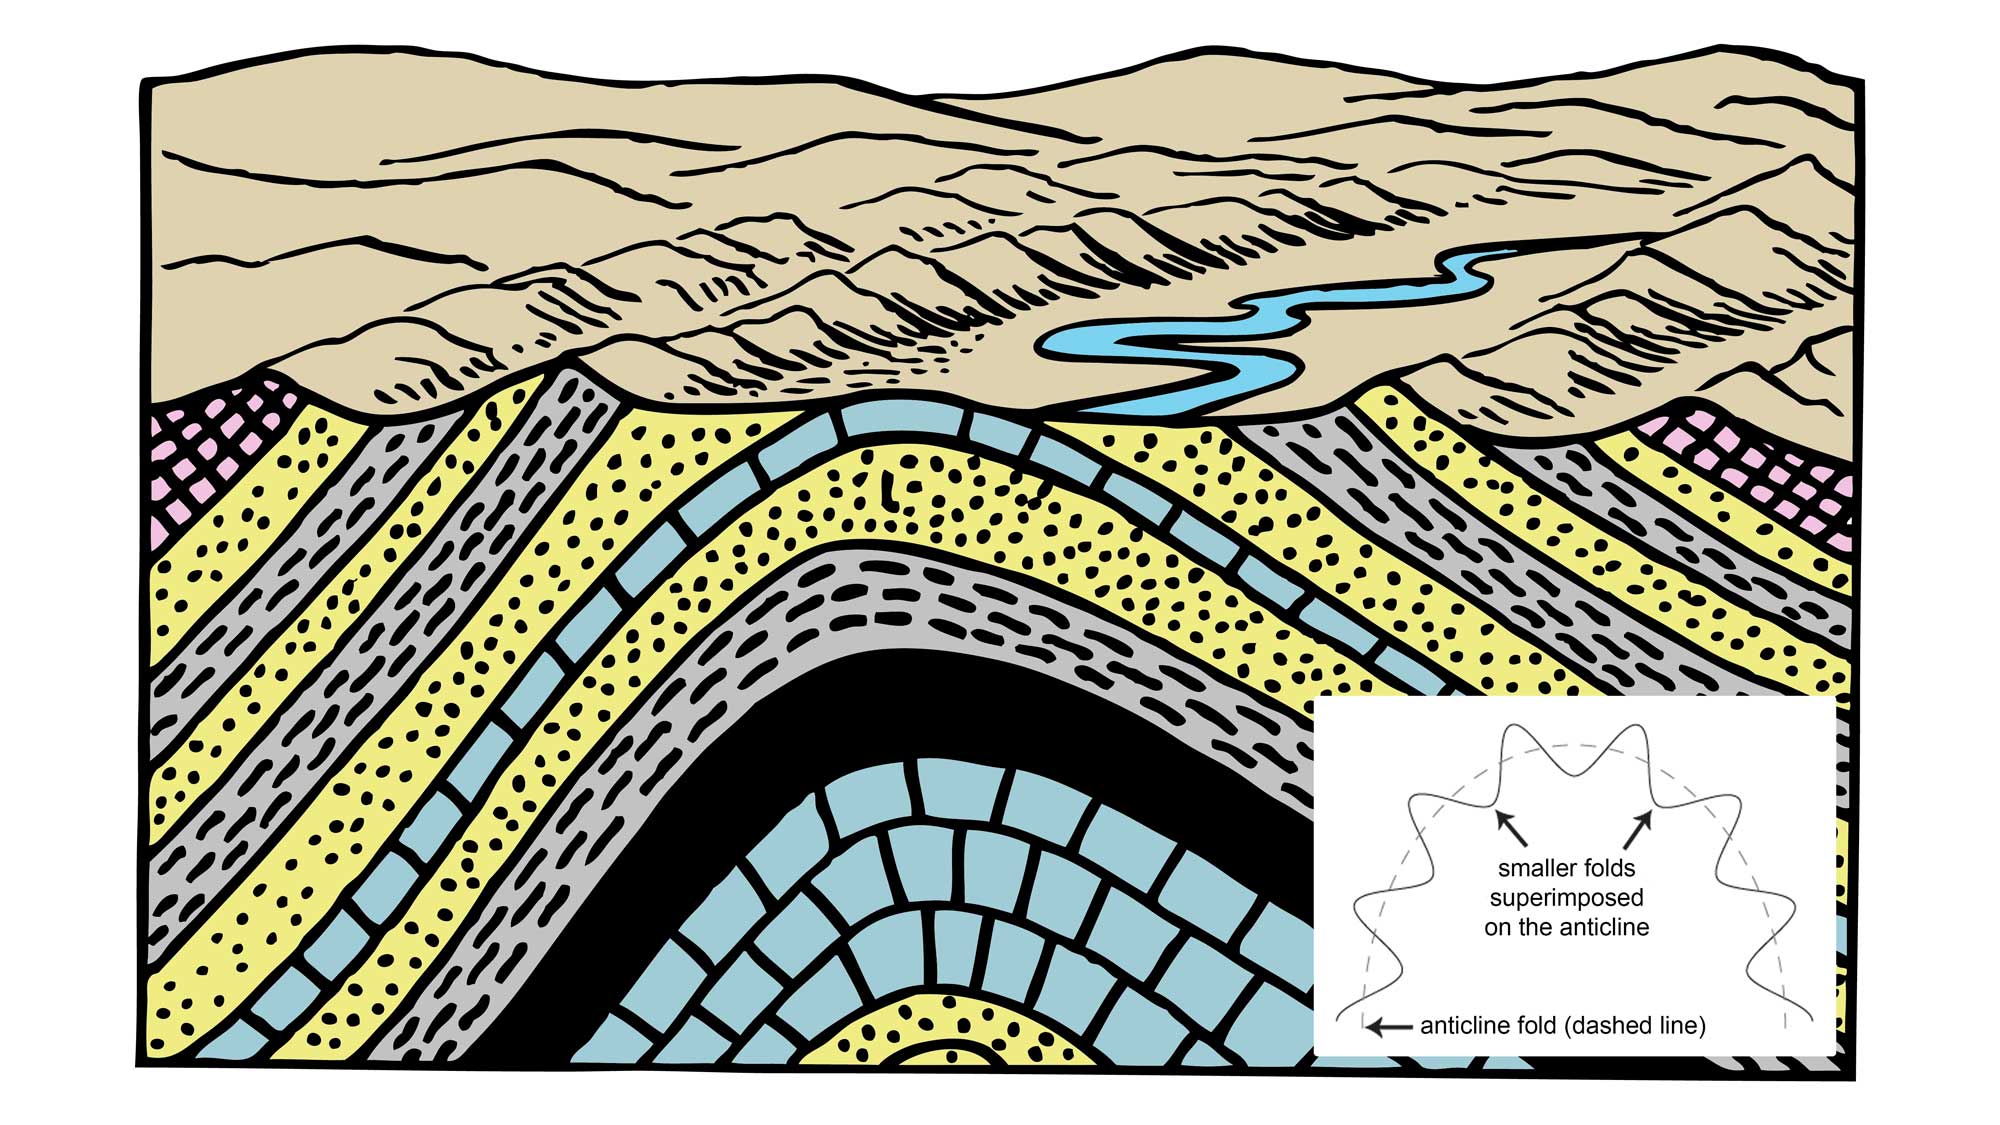 Illustration of an anticline structure.